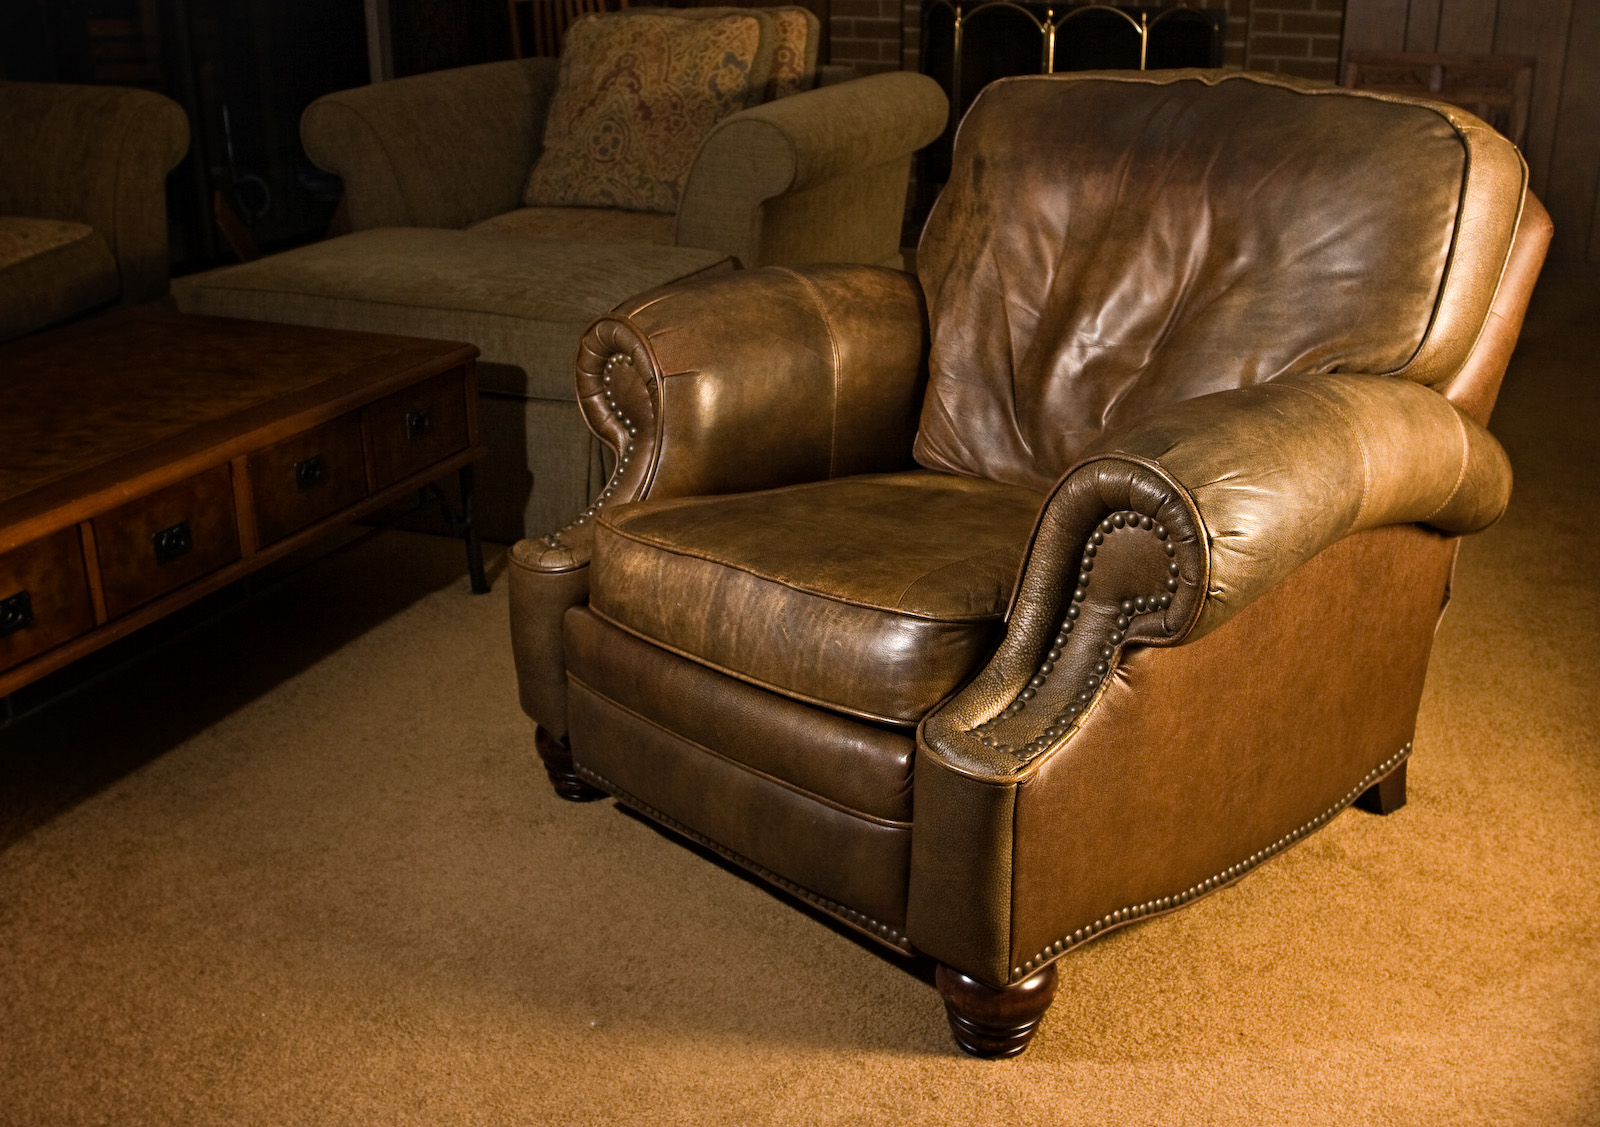 How do Power Recliners Work?